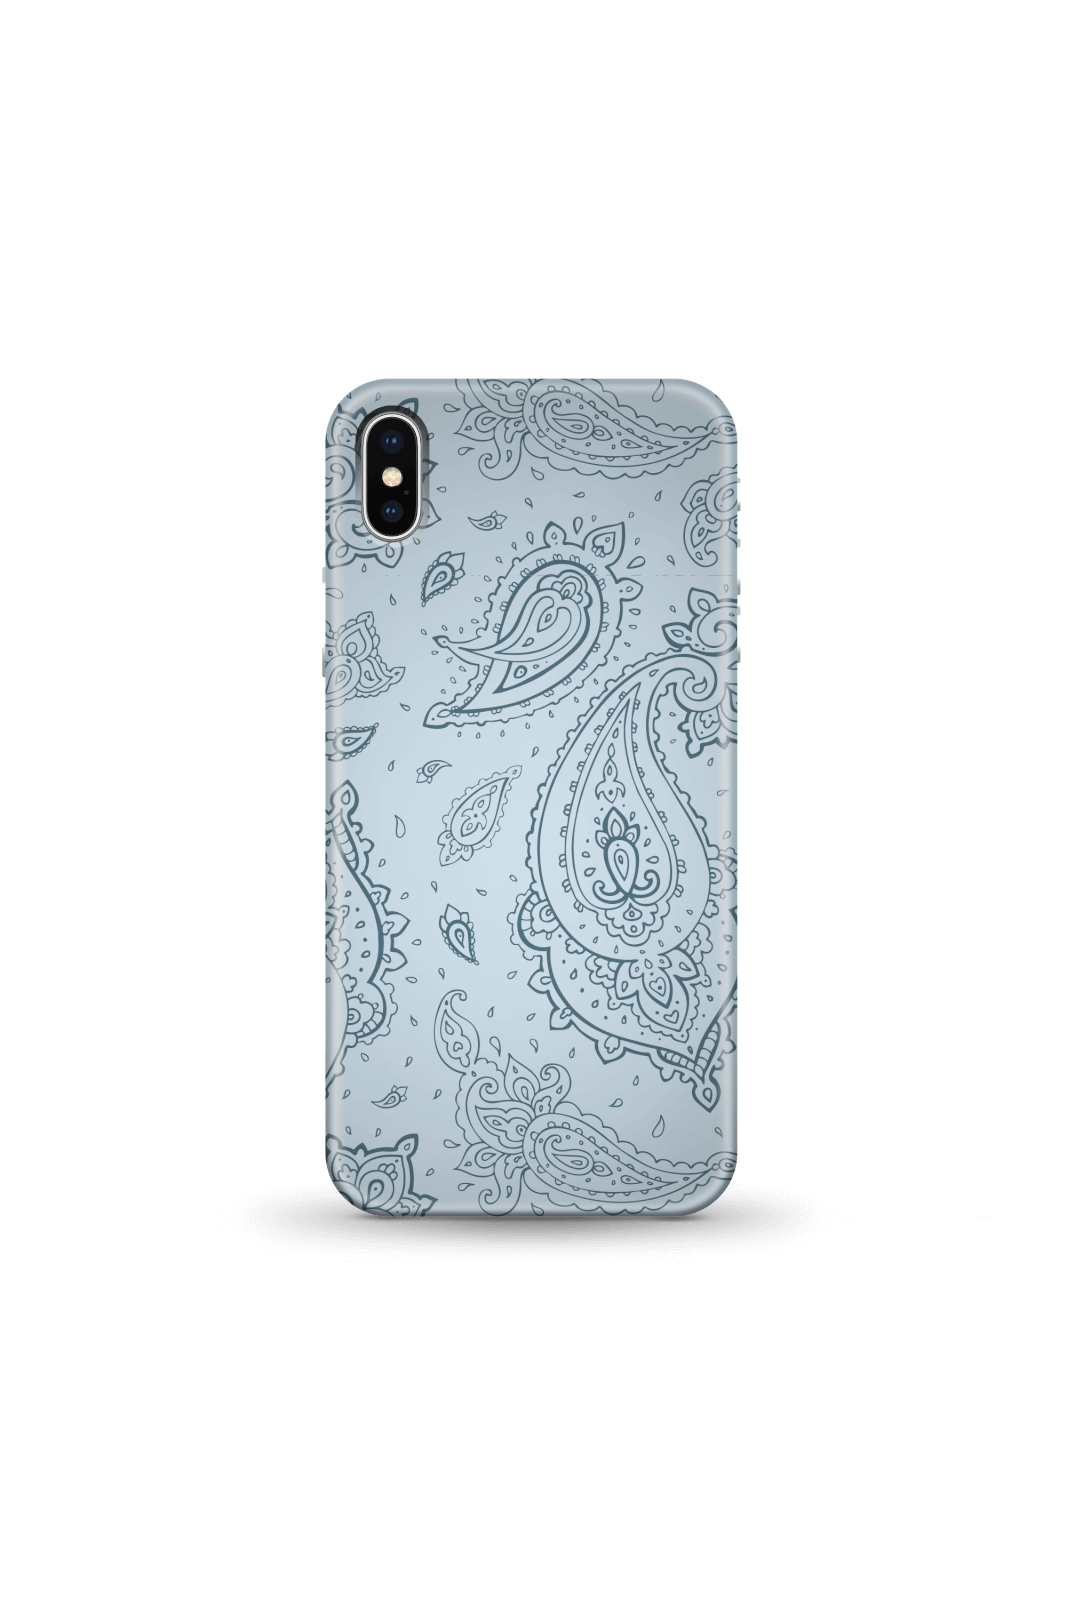 Light Blue Paisley Phone Case for iPhone and Android - iPhone 5/5s - Snap Case - Matte